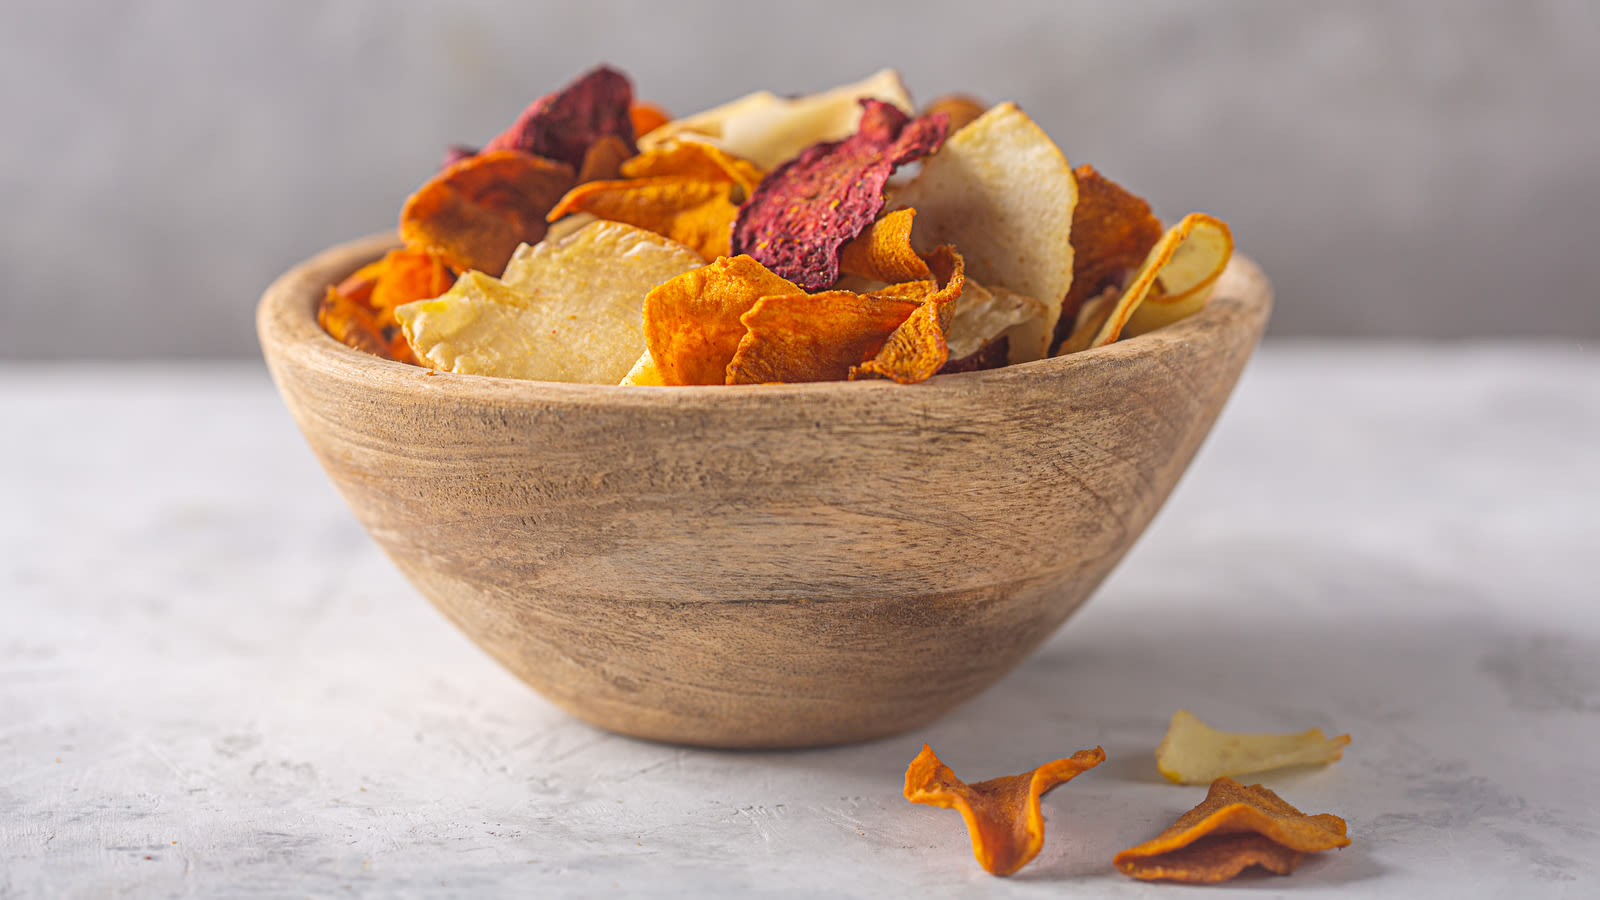 14 Of The Unhealthiest Store-Bought Veggie Chips